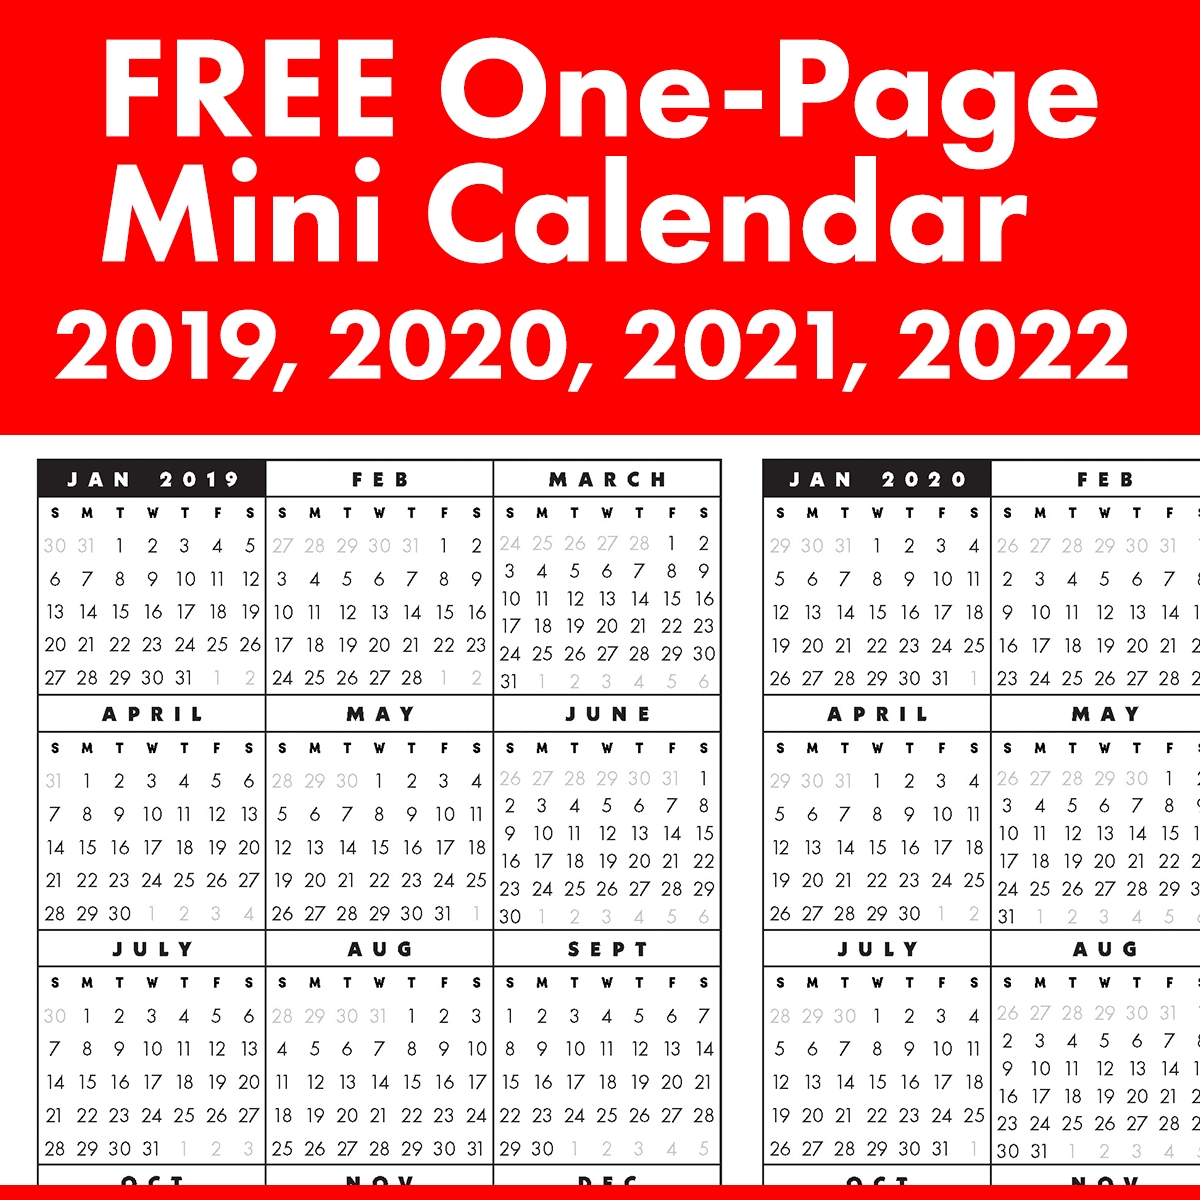 Free Full-Year, Single-Page 2019, 2020, 2021, 2022 At A within Calendar Print Out 2019 2020 2021 2022